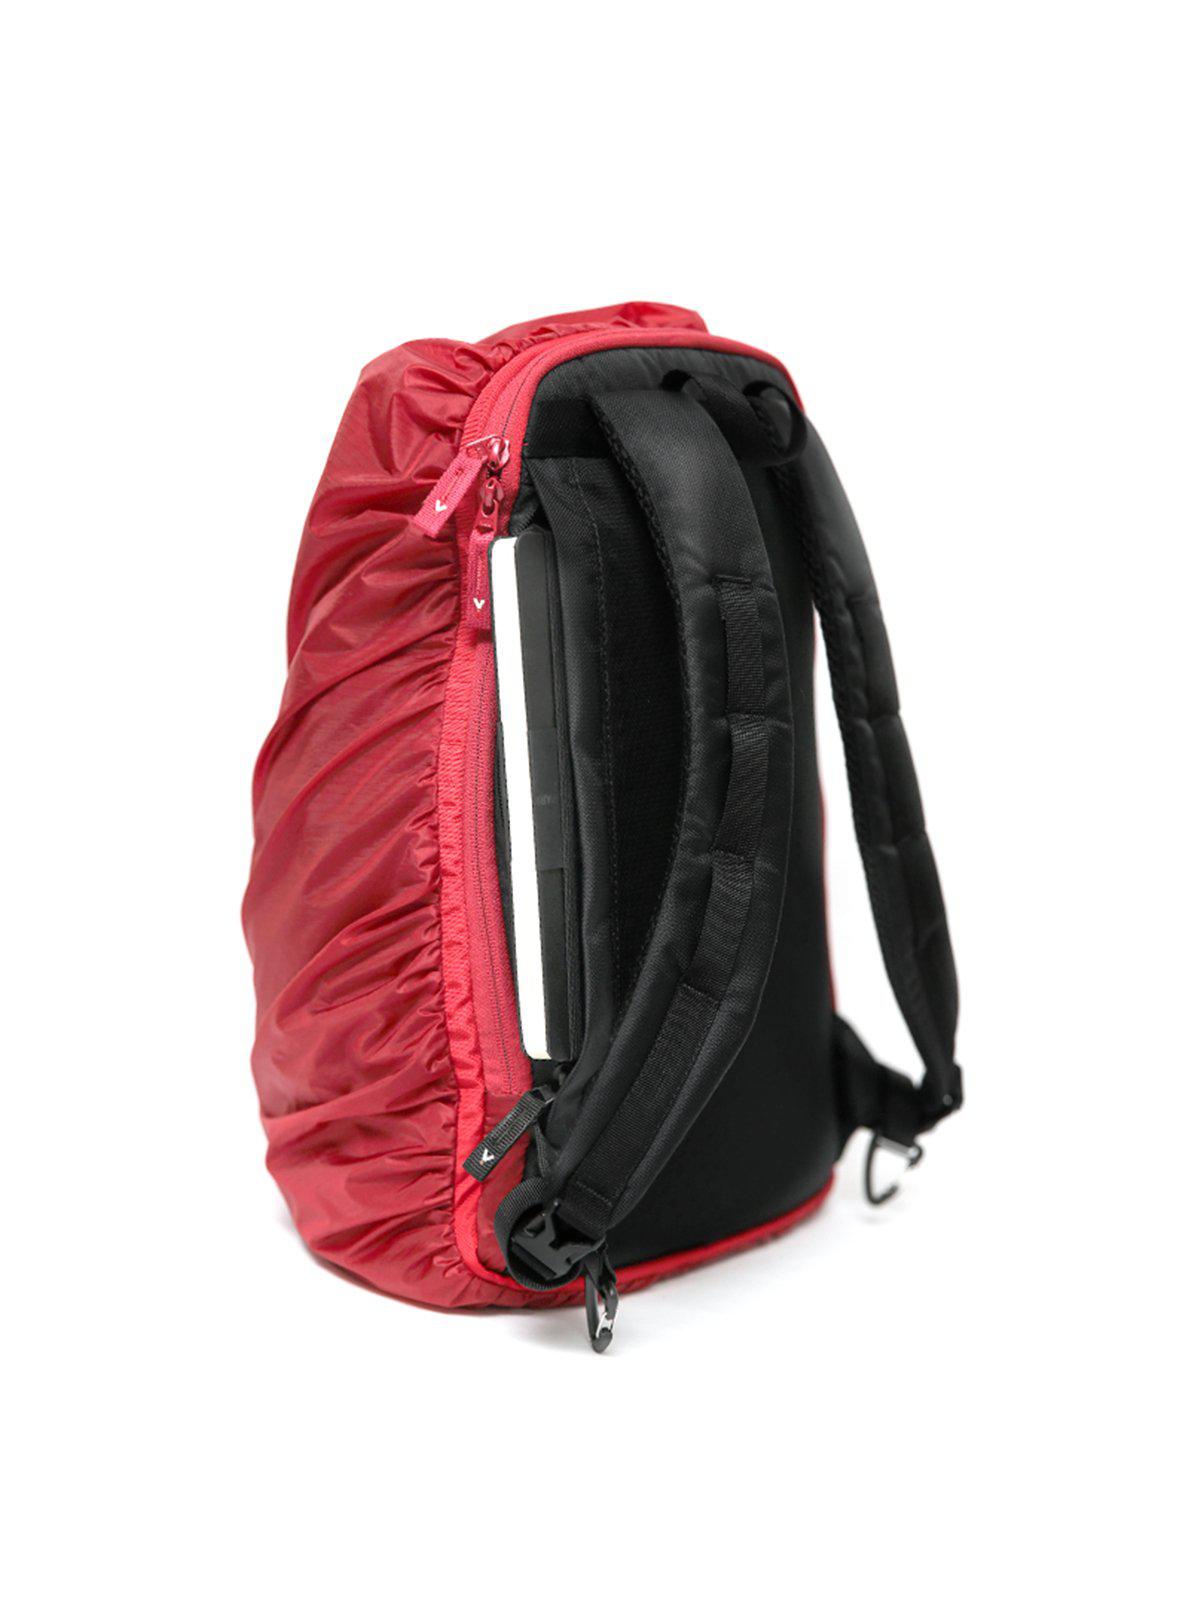 Outside Hilo Backpack Red - MORE by Morello Indonesia